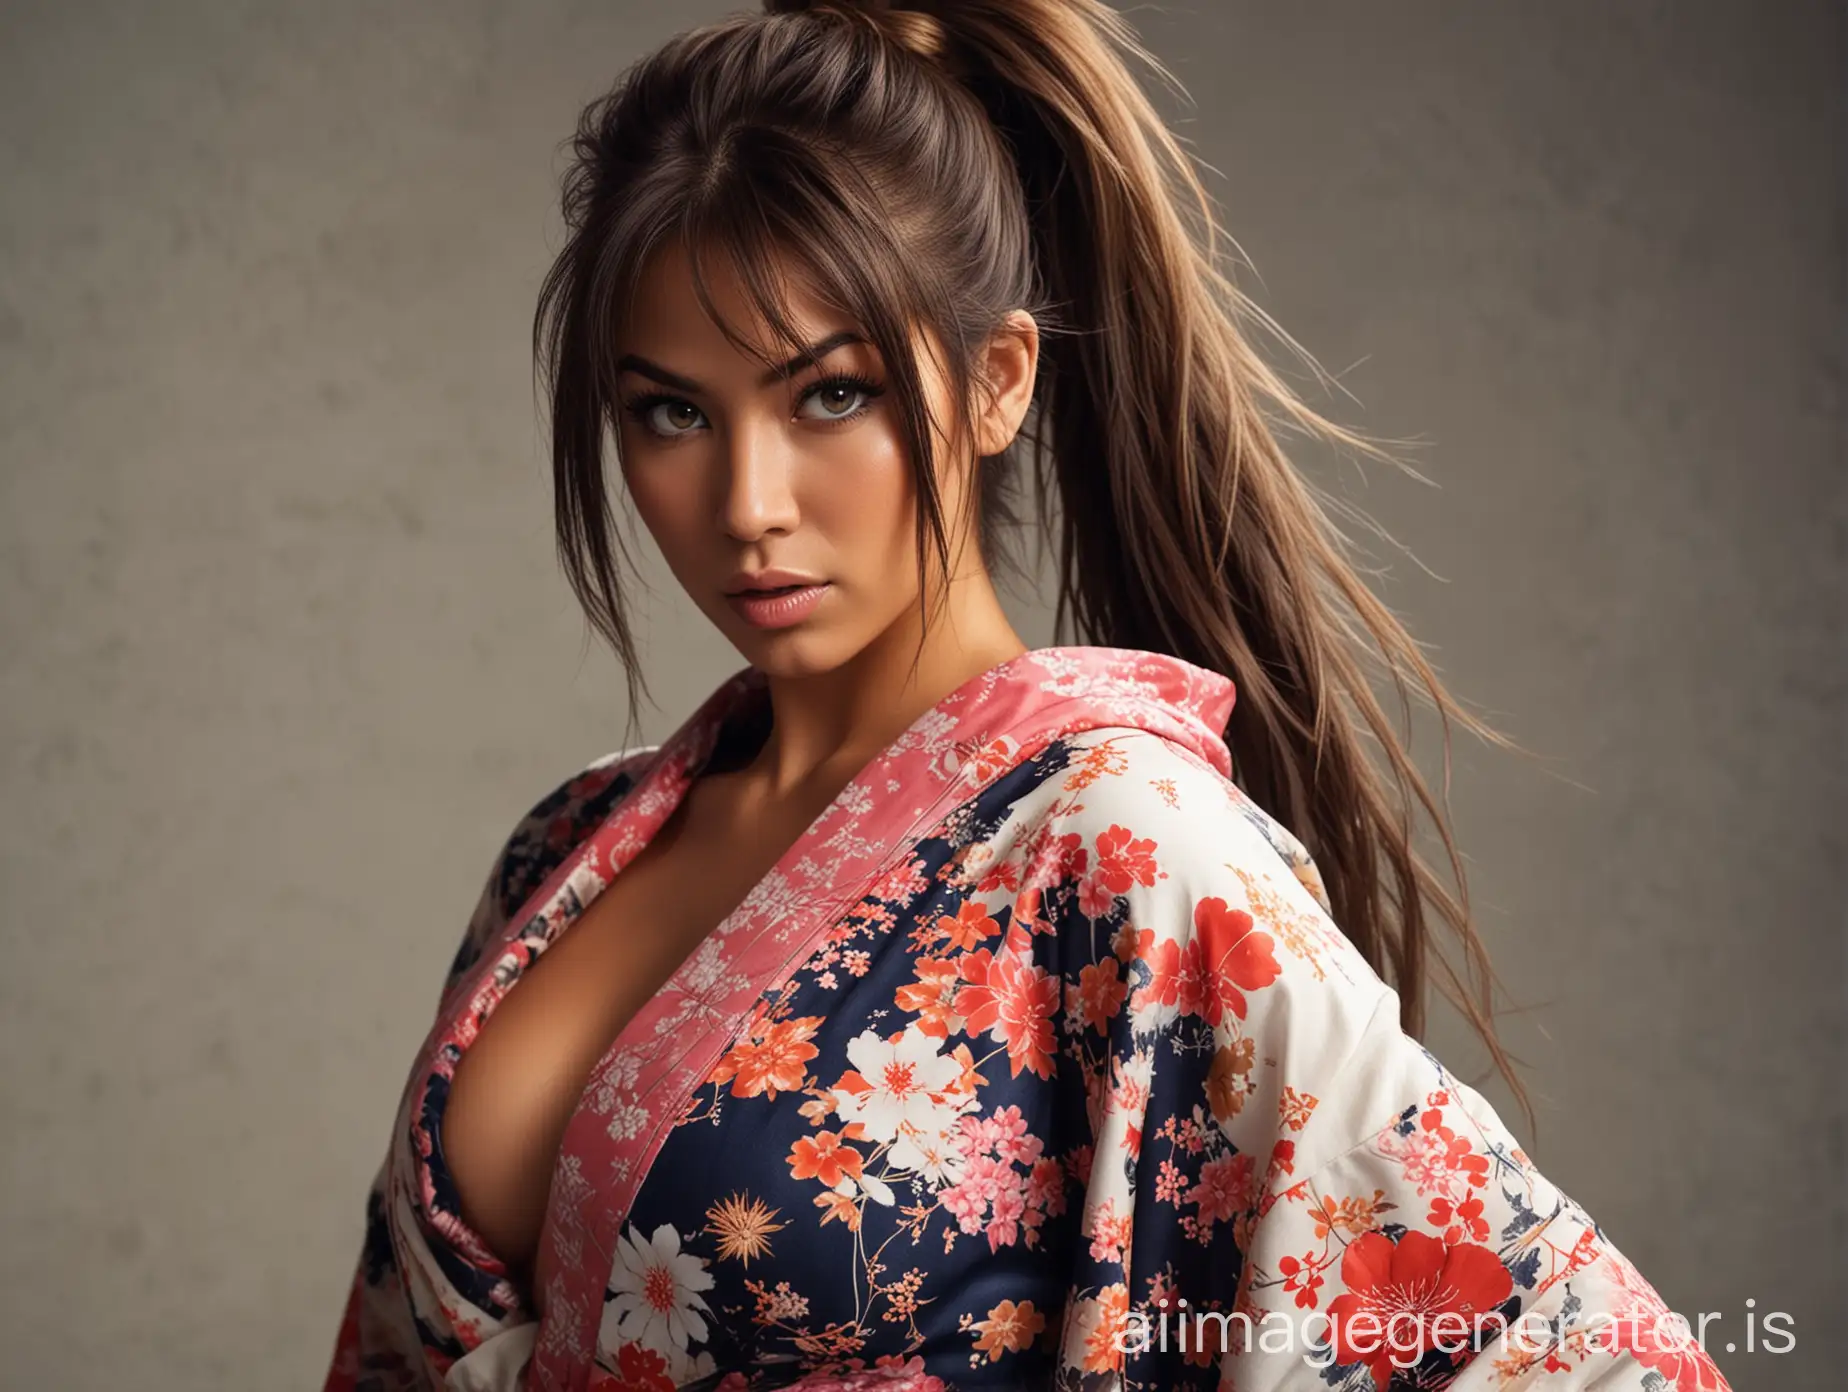 Sexy-and-Muscular-Giant-Woman-in-Kimono-Sleeved-Hoodie